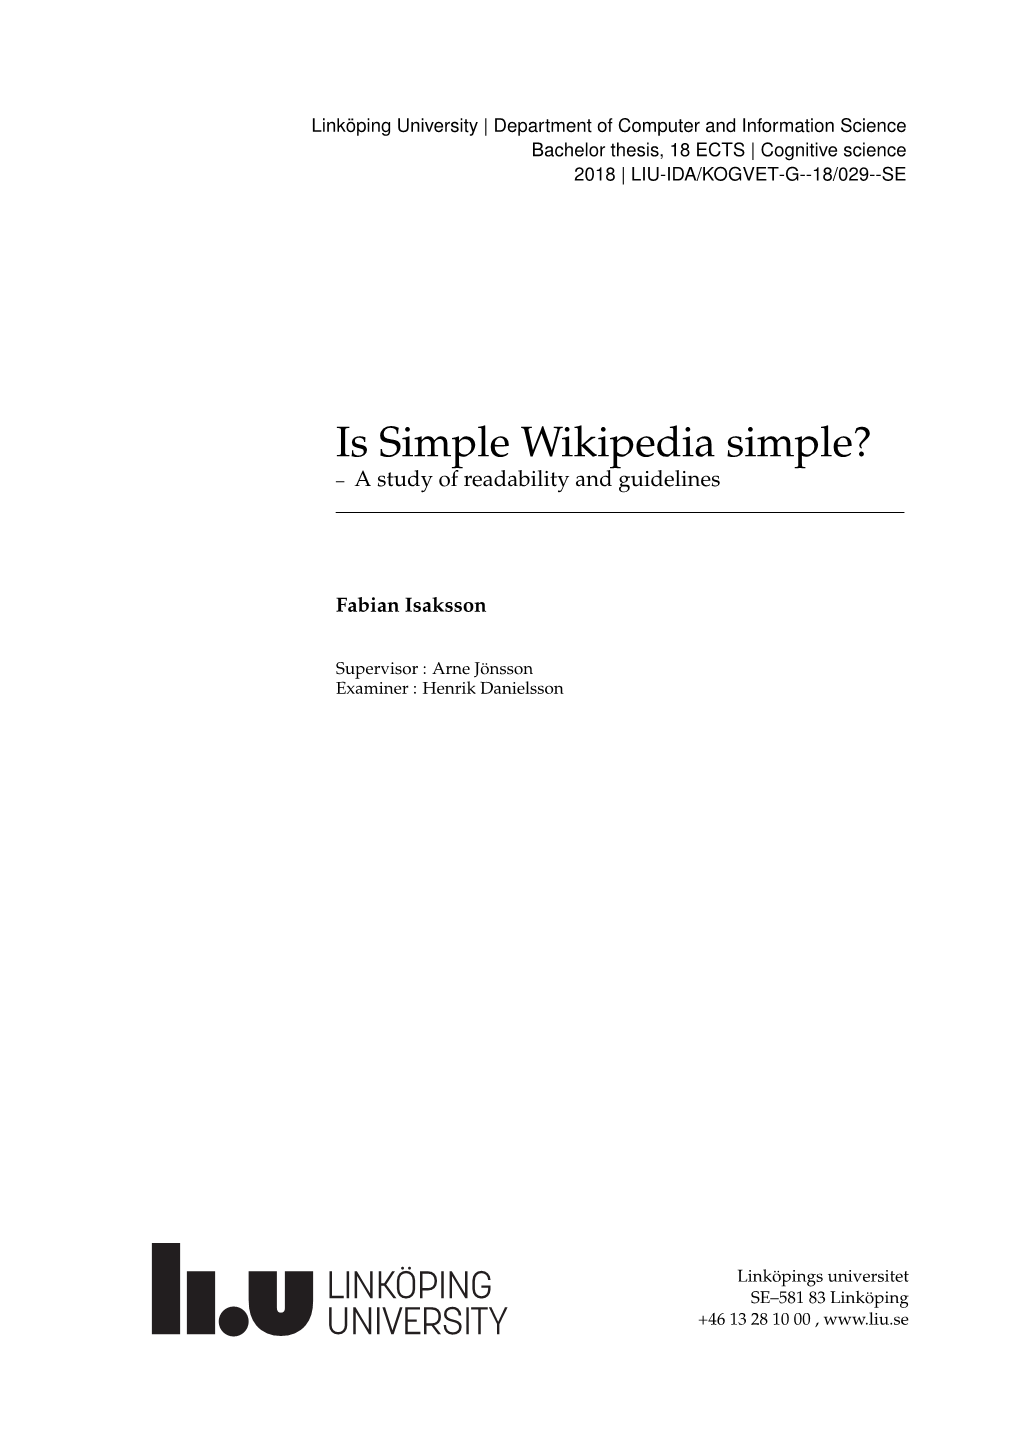 Is Simple Wikipedia Simple? – a Study of Readability and Guidelines